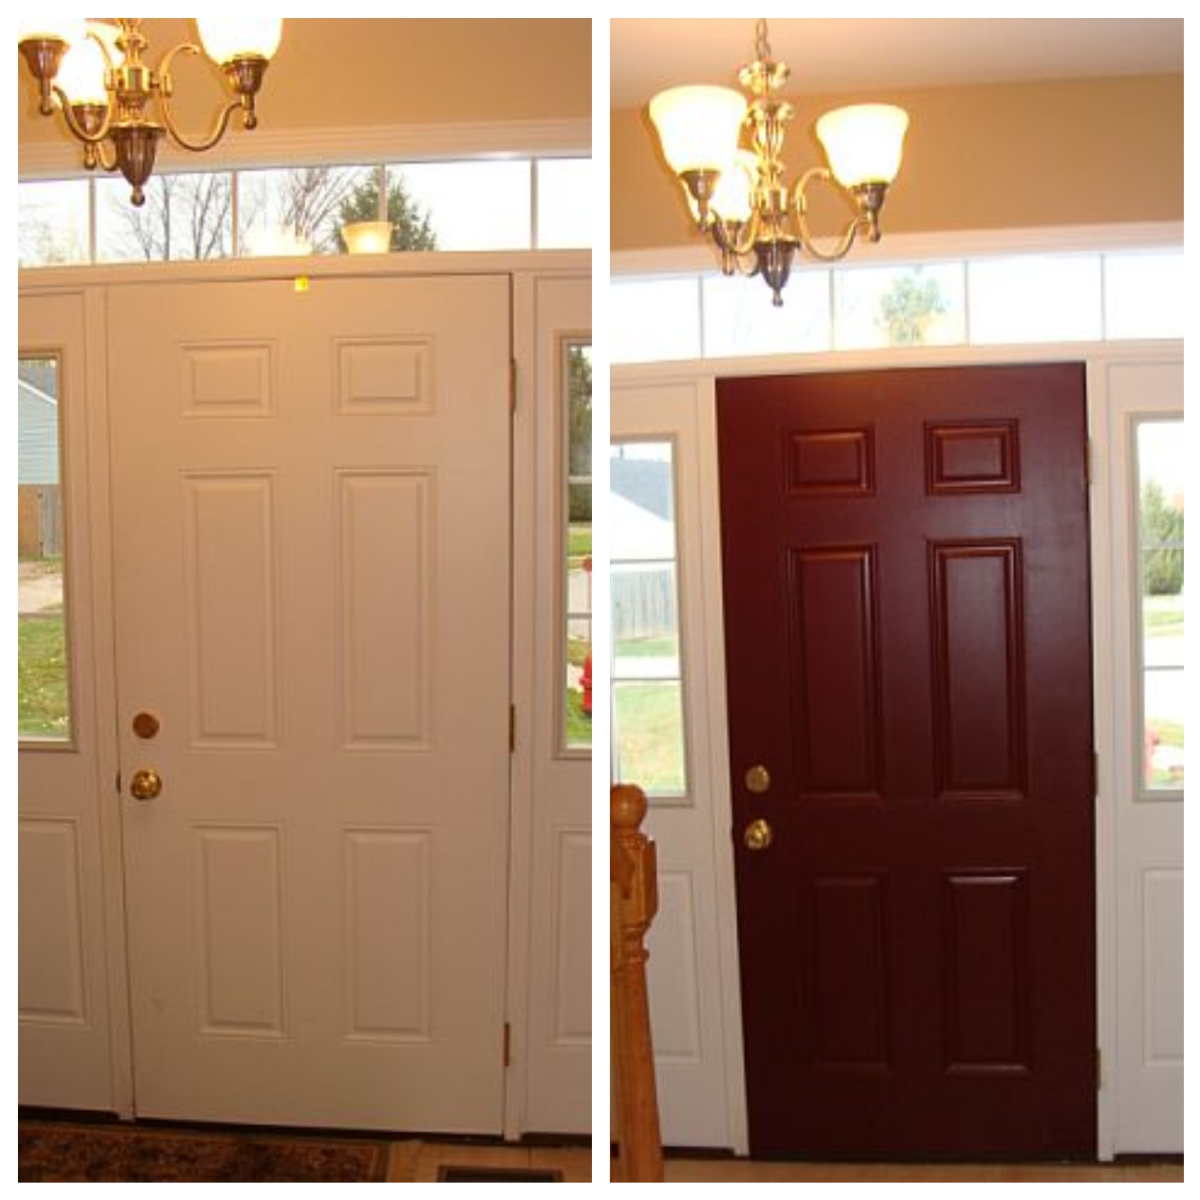 A boring white front door gets a boost from a coat of red paint.